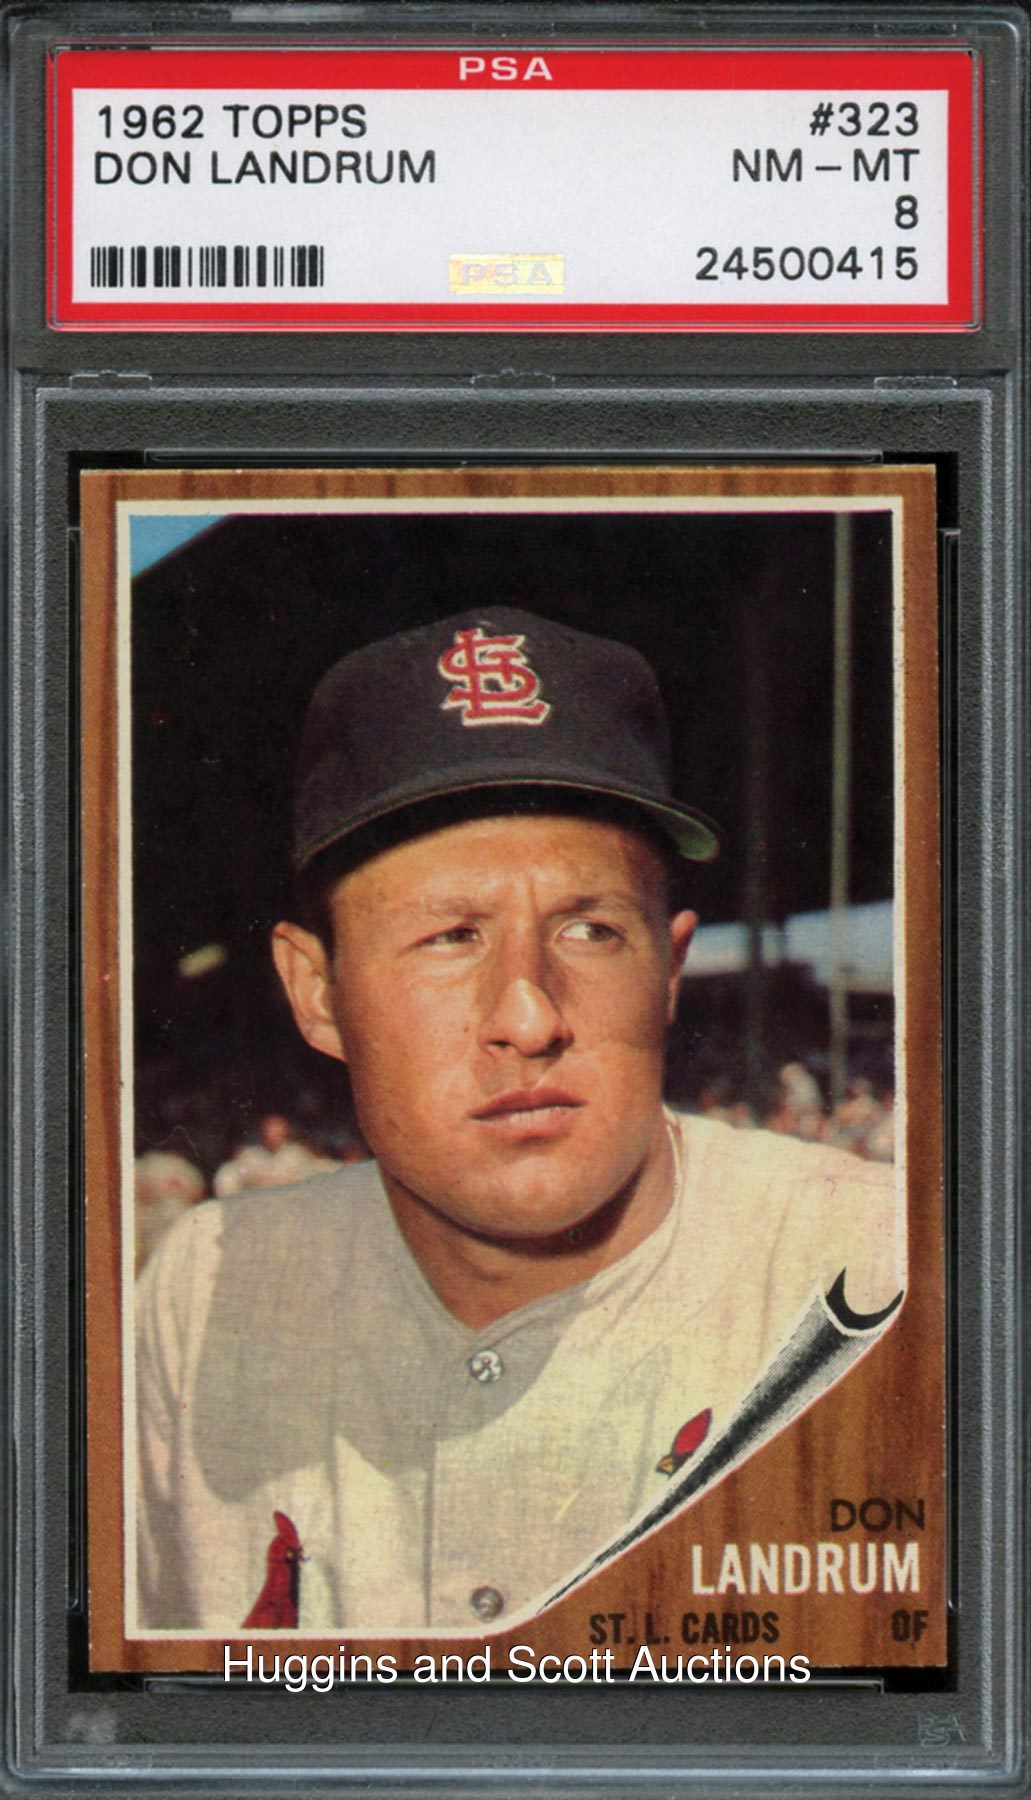 1962 Topps Baseball #323 Don Landrum PSA NM-MT 8 with Only Two Better!